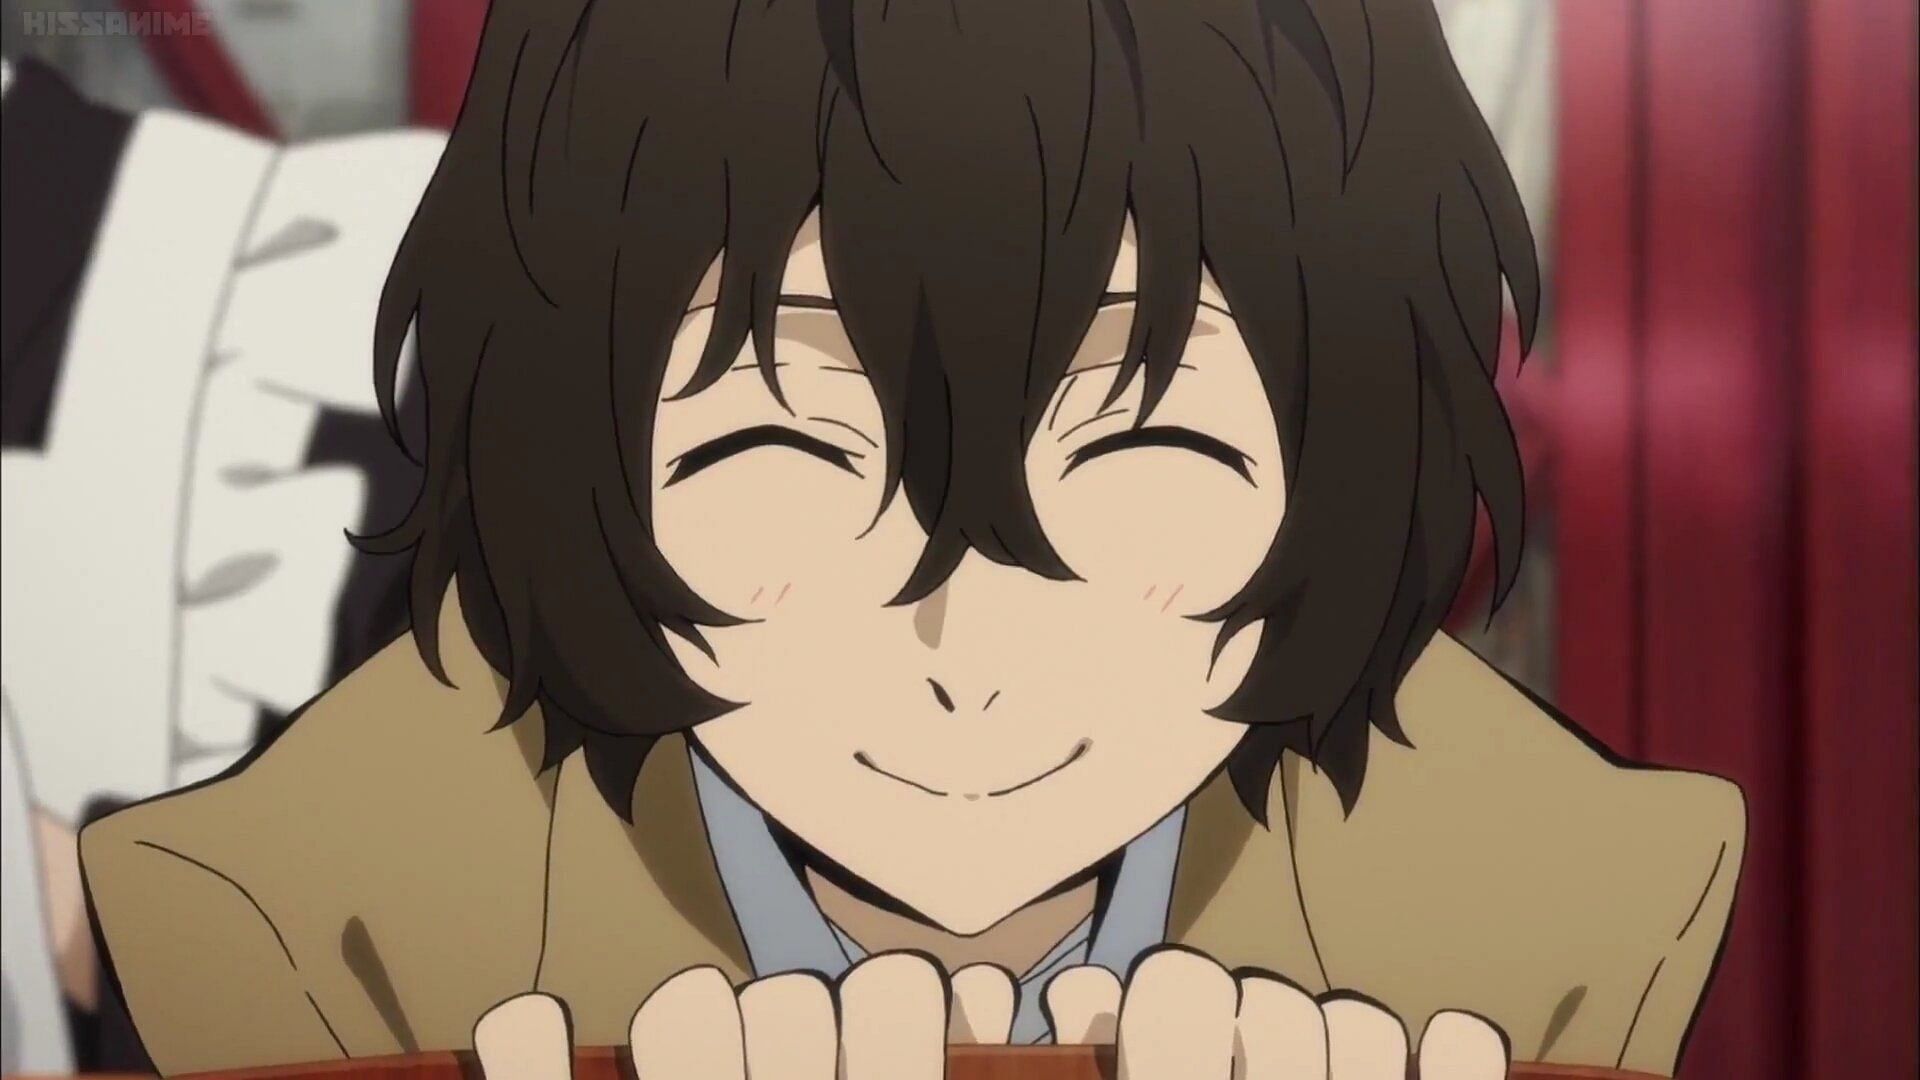 Bungou Stray Dogs' Ending, Explained: Why Did Dazai Let Himself Get  Captured? What To Expect From Season 2?